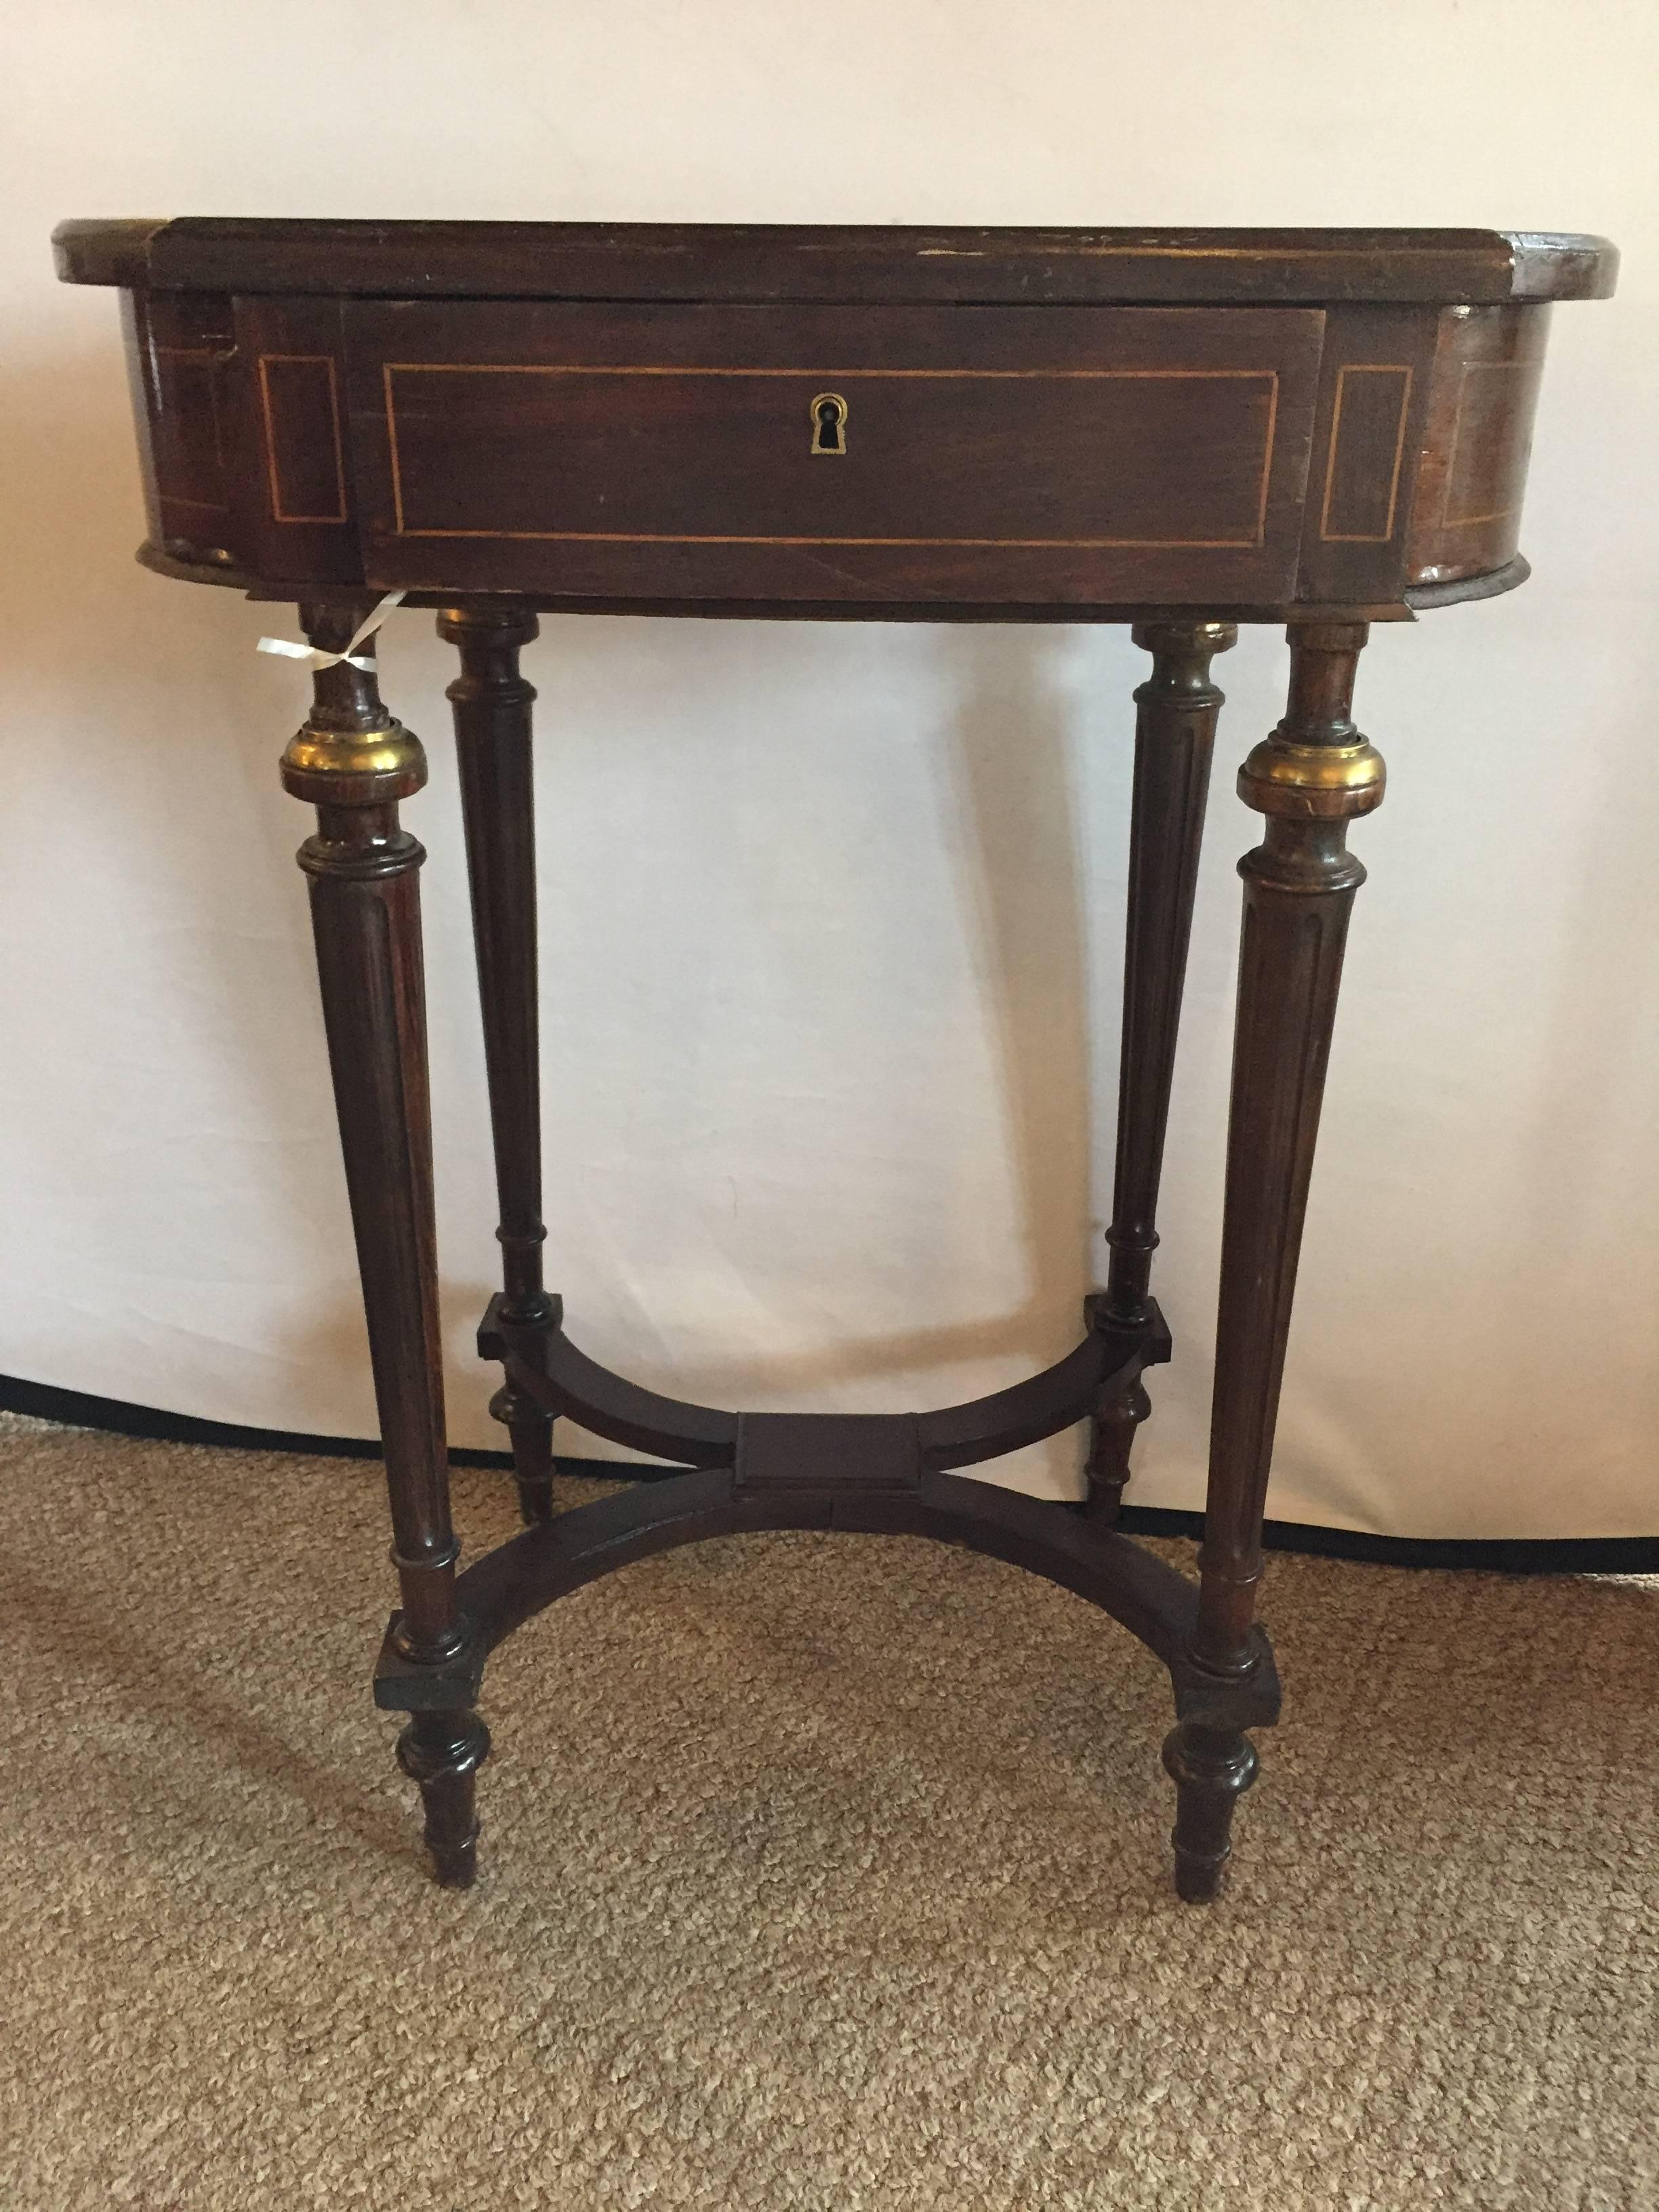 An antique inlaid floral writing desk with bronze mounts in the Louis XVI fashion with bronze-mounted tapering legs having an X form undercarriage supporting a single drawer pull up top with fitted interior.